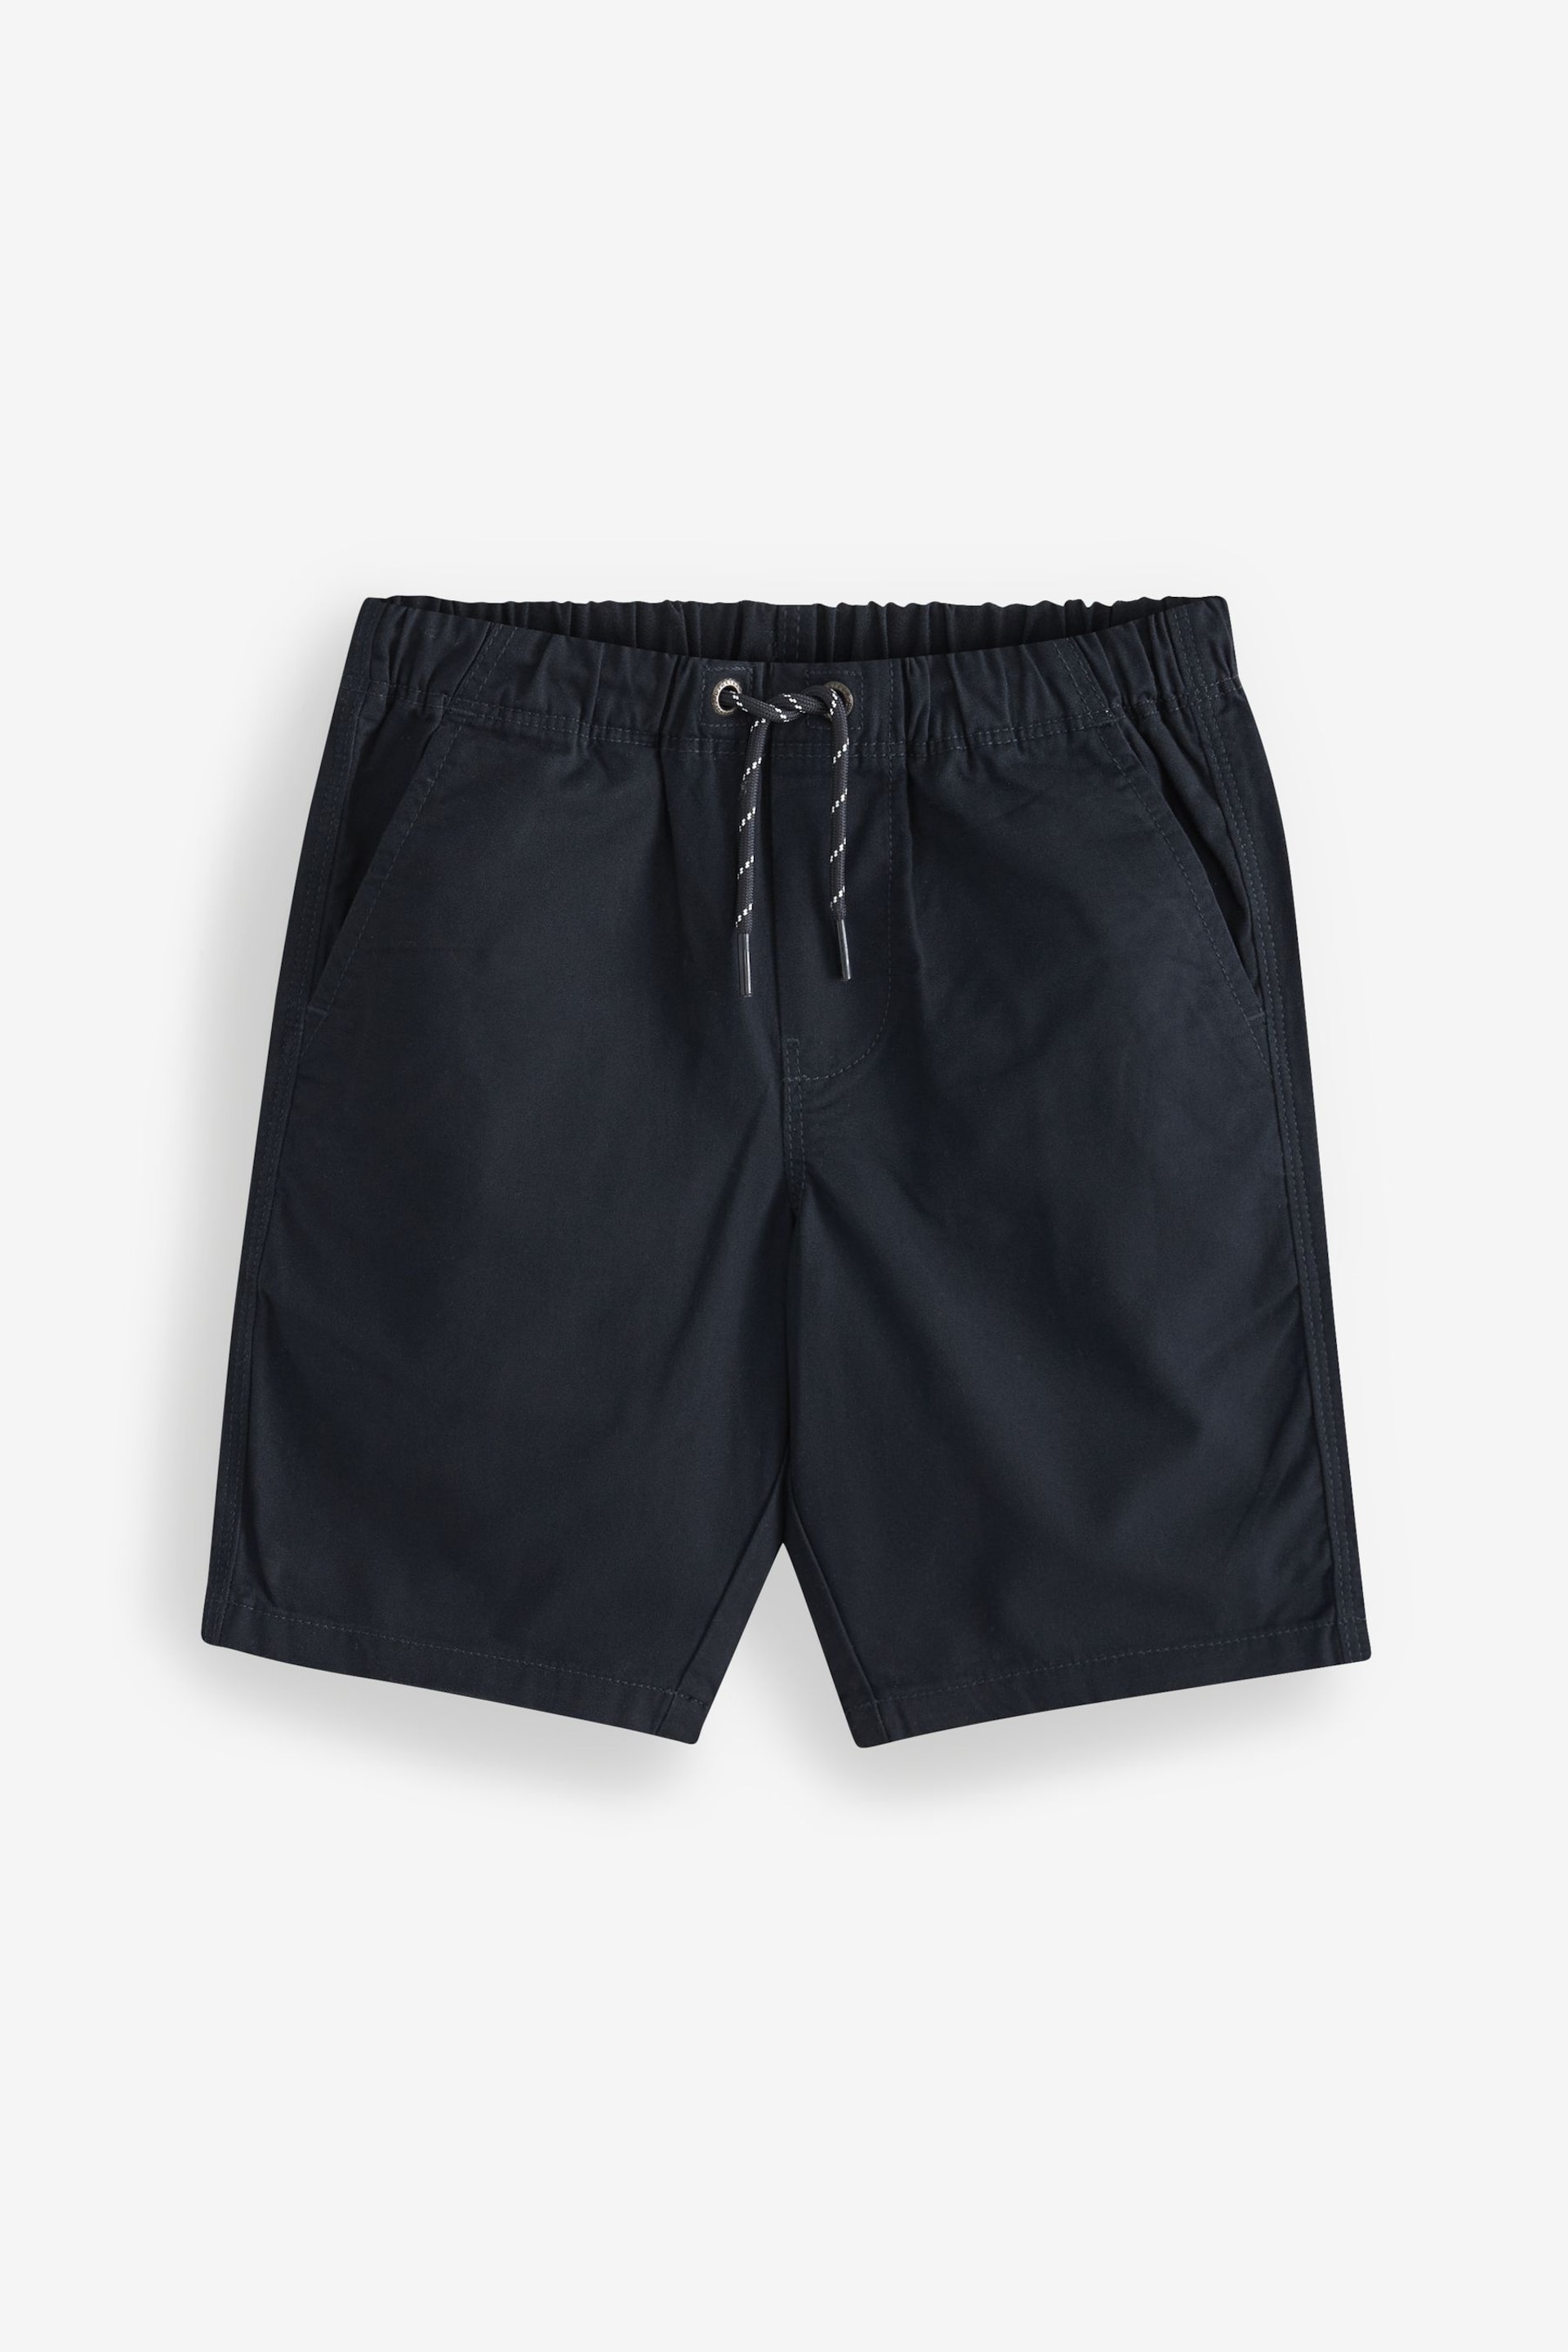 Blue Pull-On Shorts 3 Pack (3-16yrs) - Image 5 of 5